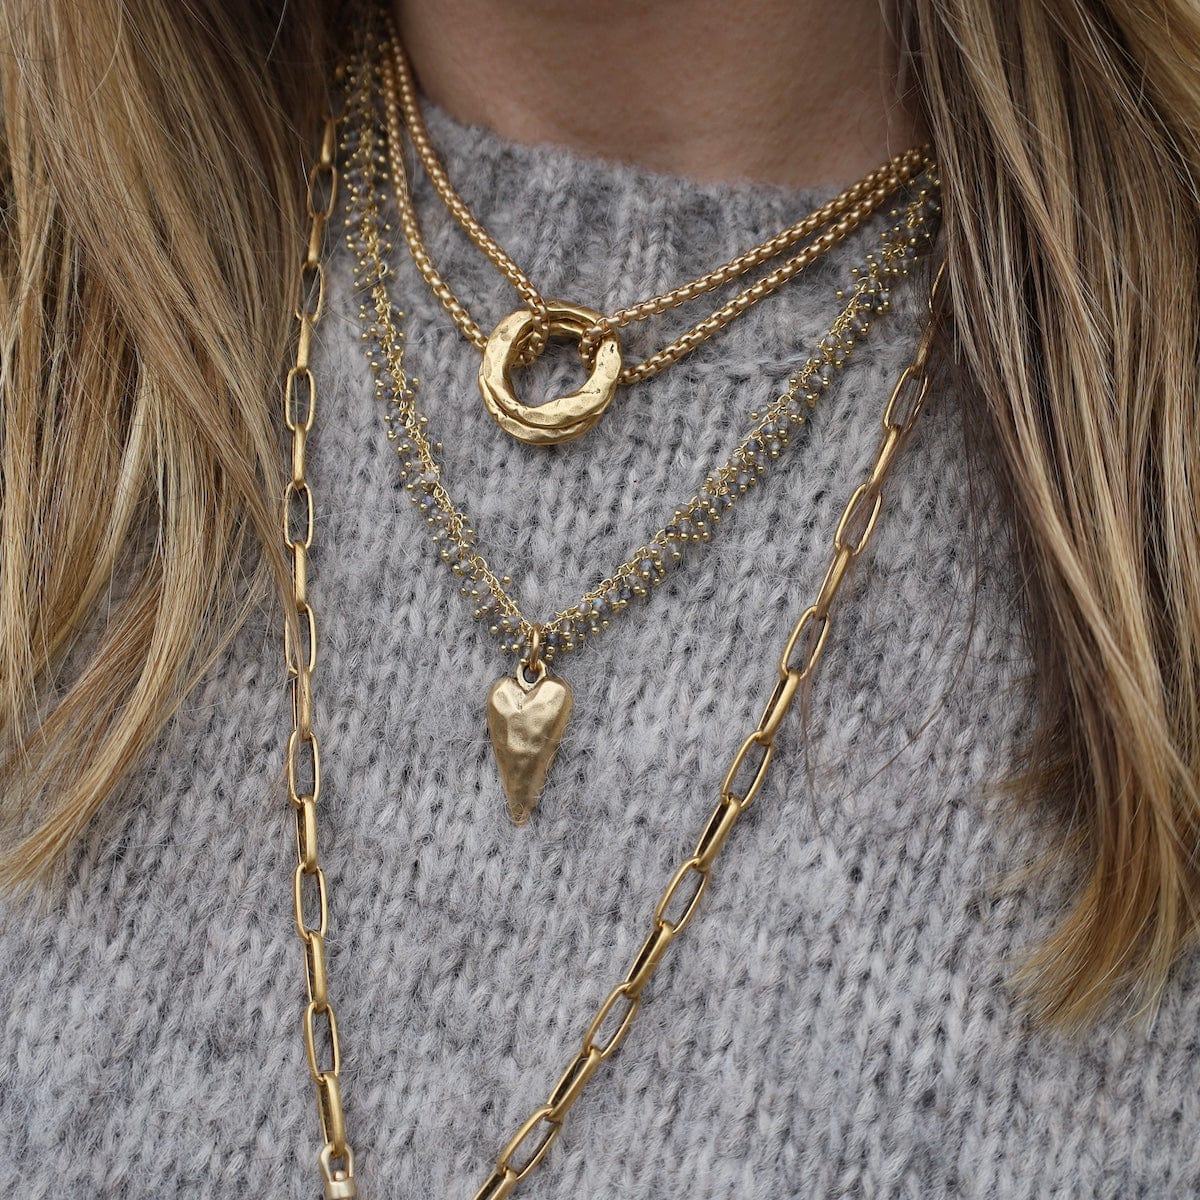 NKL-GPL Matte Gold Double Circle Necklace